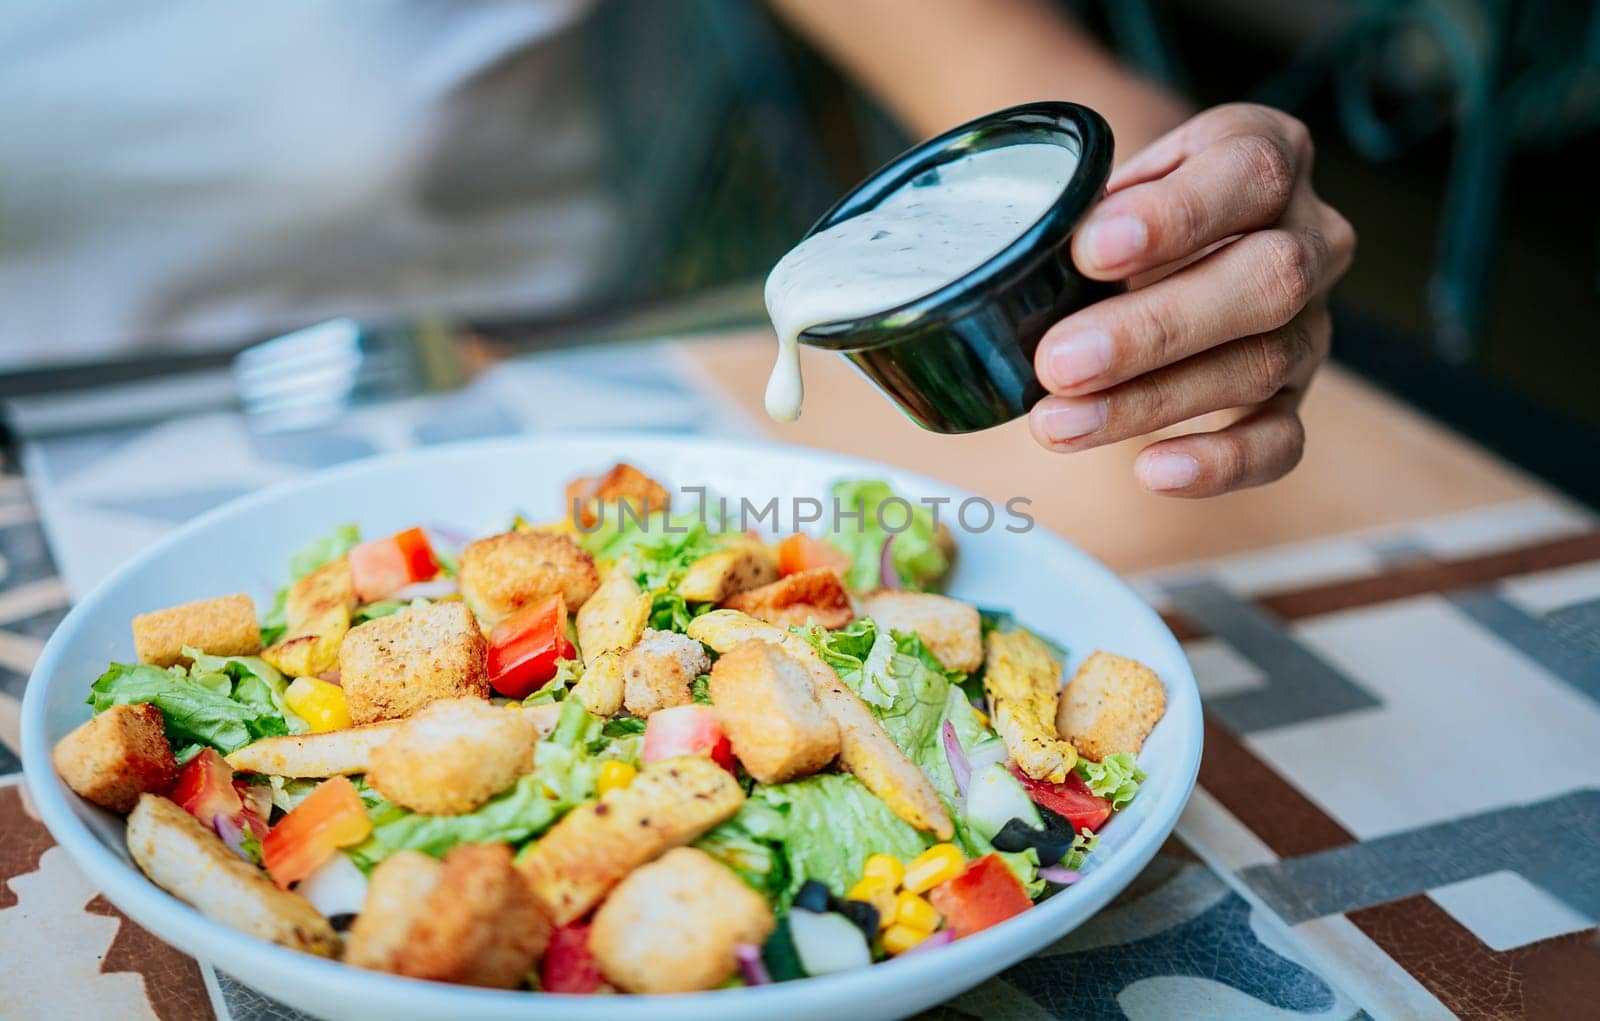 Close up of hand preparing a vegetable salad. Concept of healthy food and lifestyle, Hand putting dressing on a caesar salad